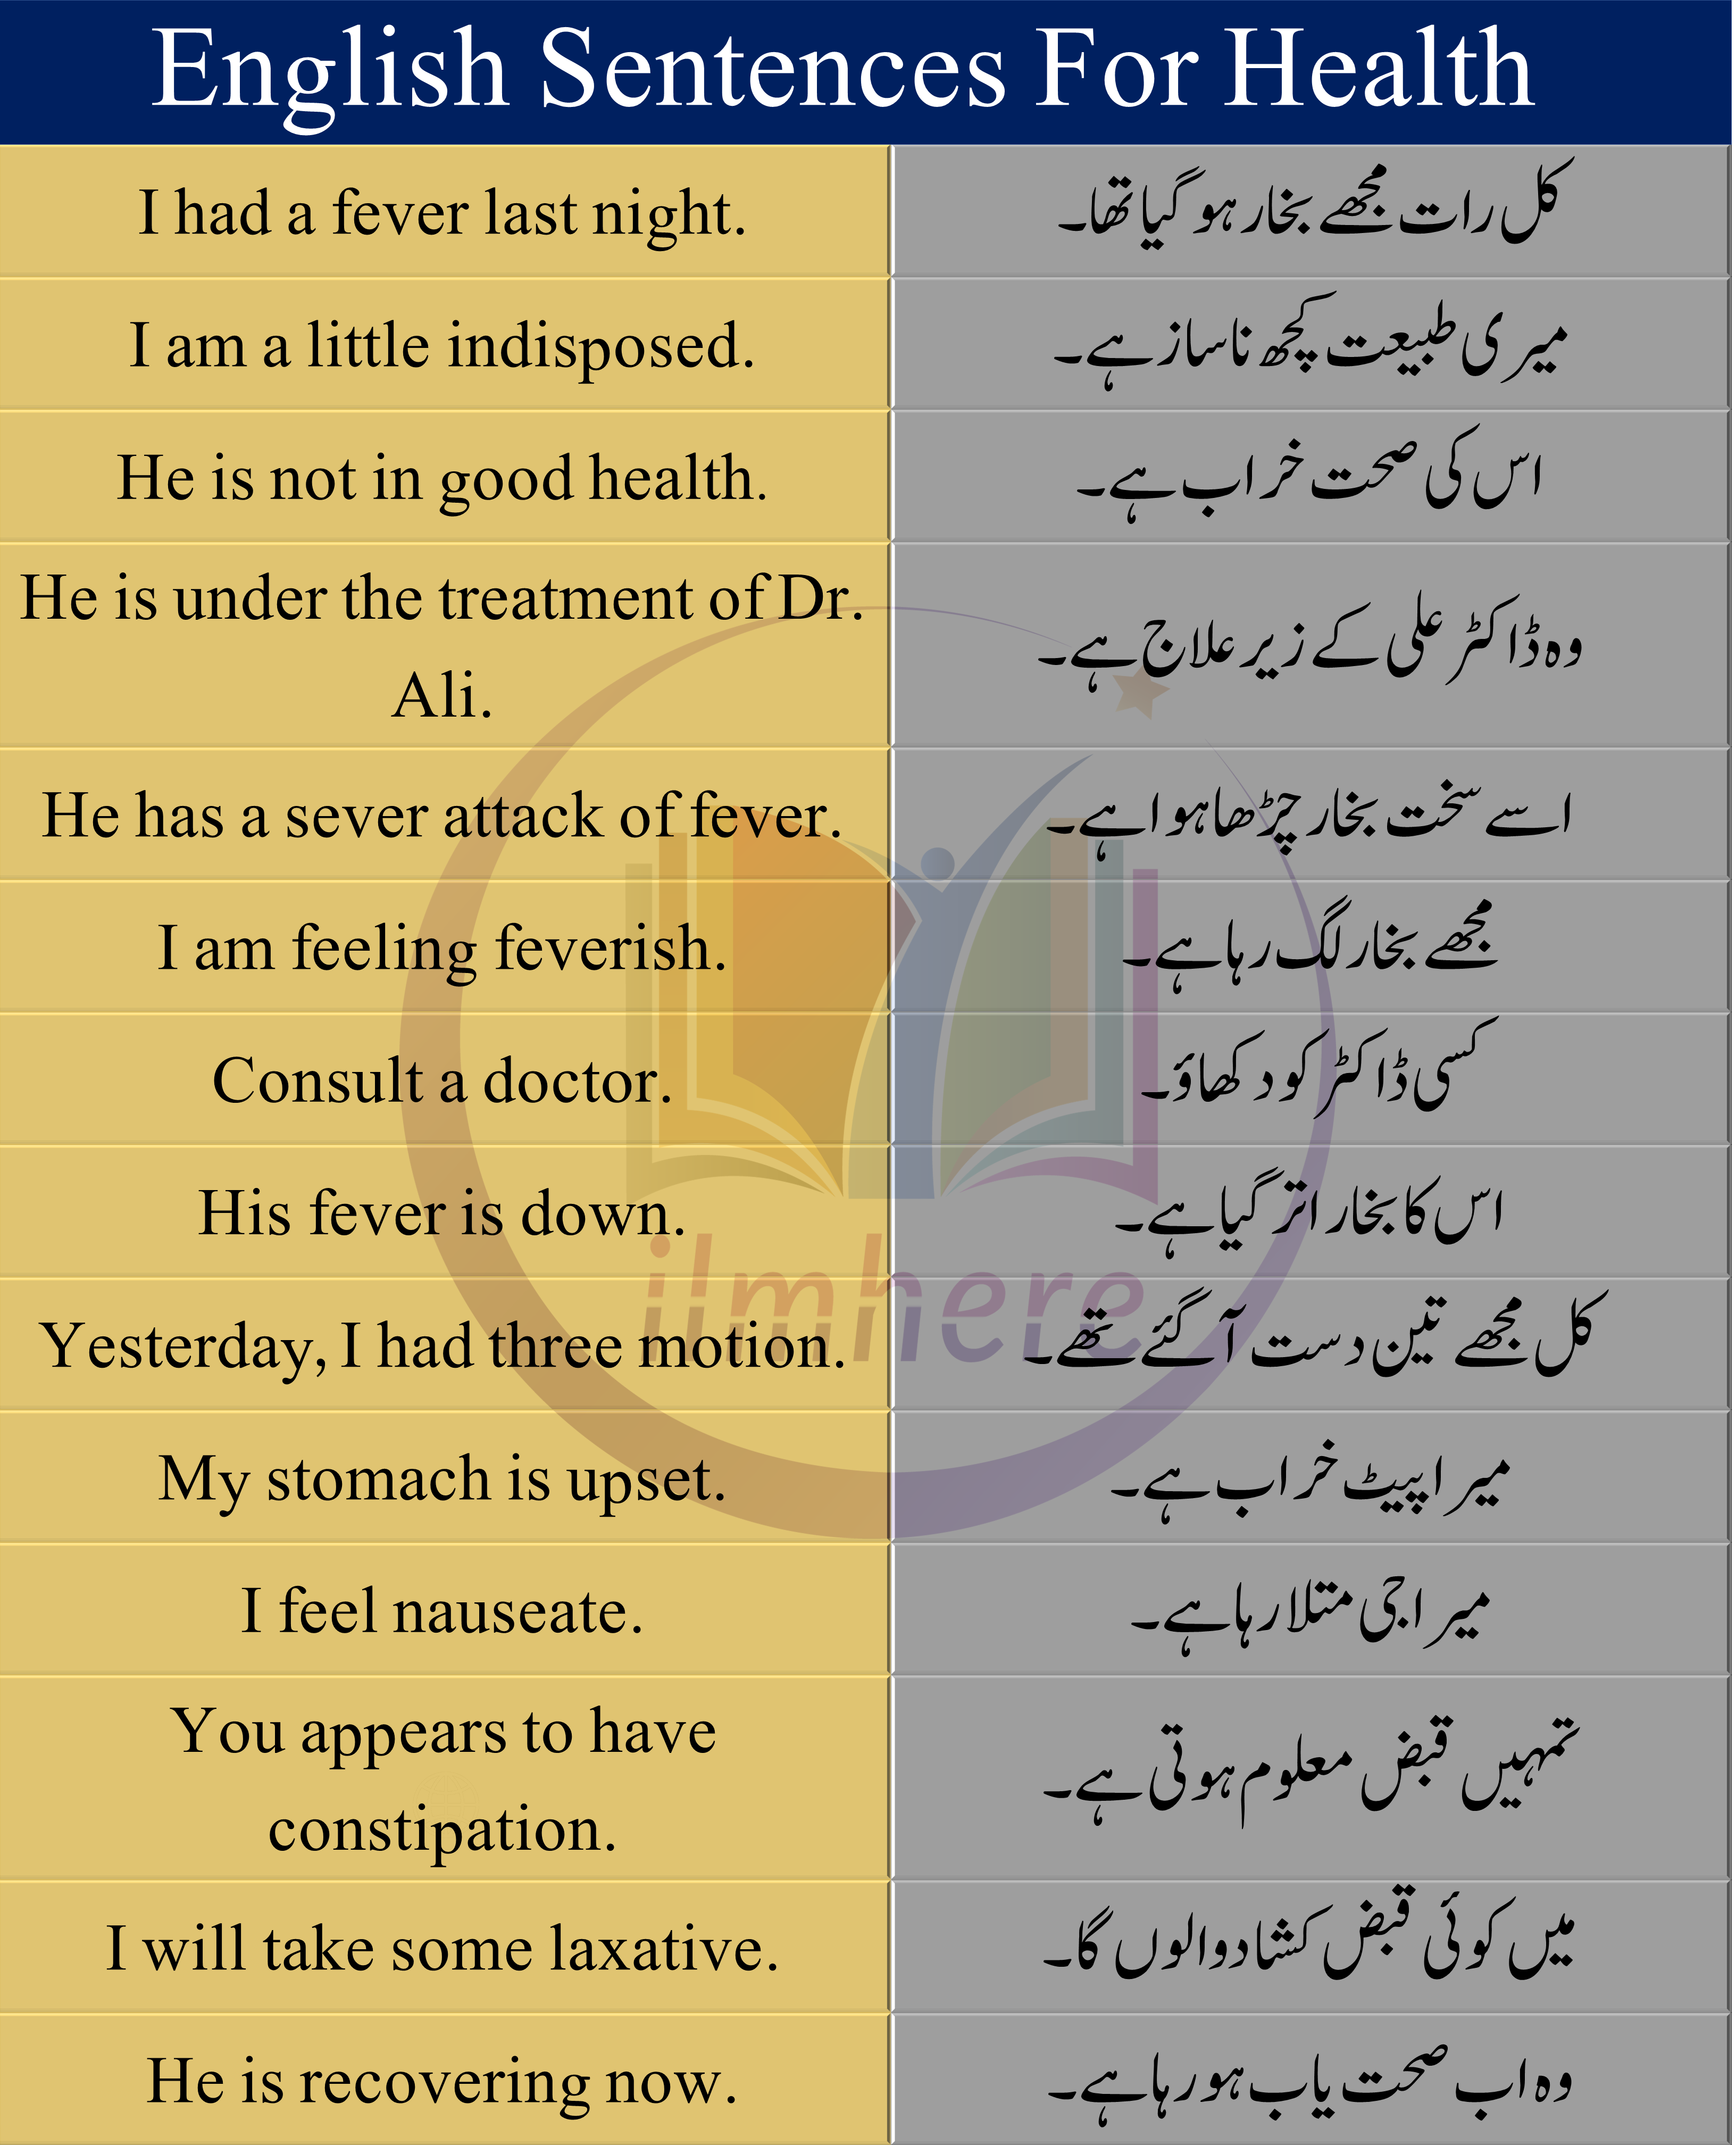 60 Sentences About Health In English And Urdu/Hindi